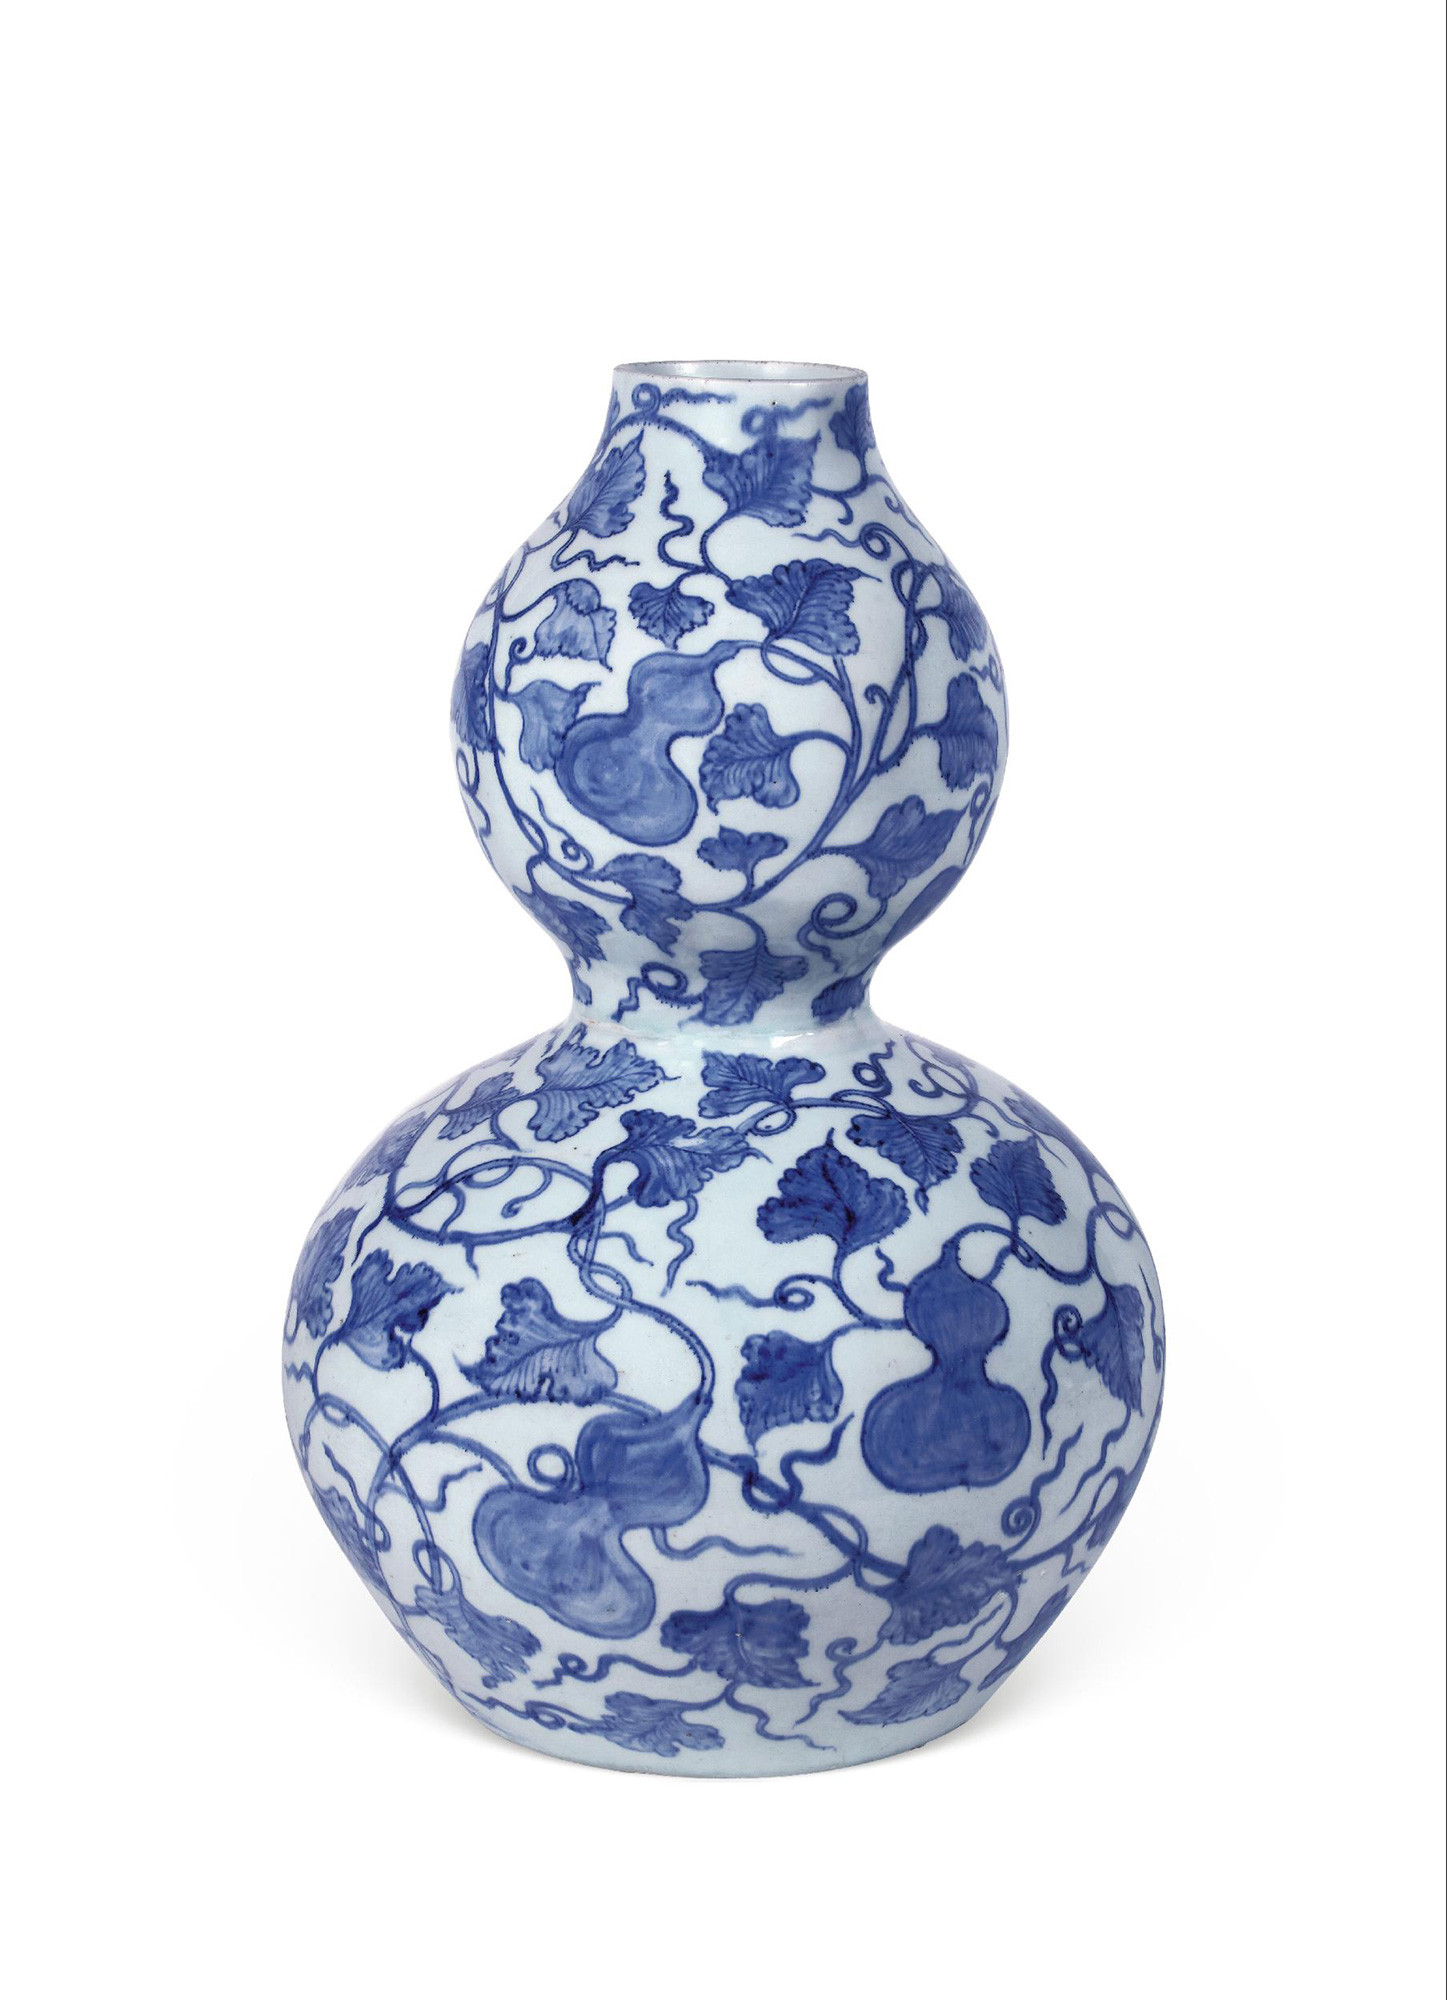 AN EXTREMELY RARE AND IMPORTANT BLUE AND WHITE DOUBLE-GOURD VASE， THE ALEXANDER VASE